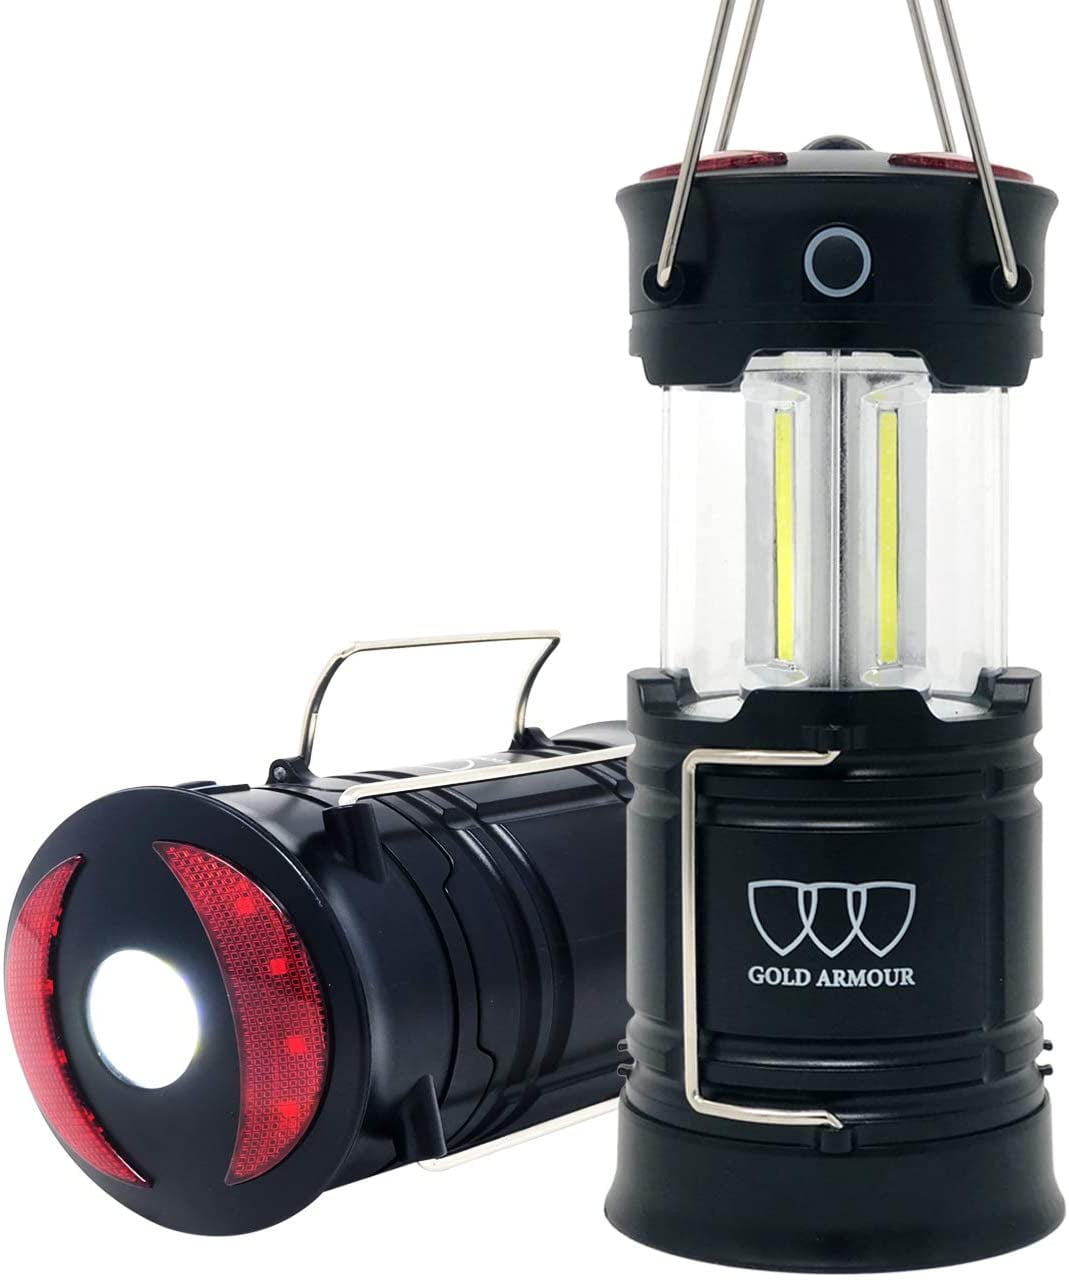 Outages Emergencies Camping Lantern Gold Armour Brightest LED Lantern 4Pack Hurricanes EMITS 500 LUMENS! - Camping Gear Equipment Accessories for Hiking 